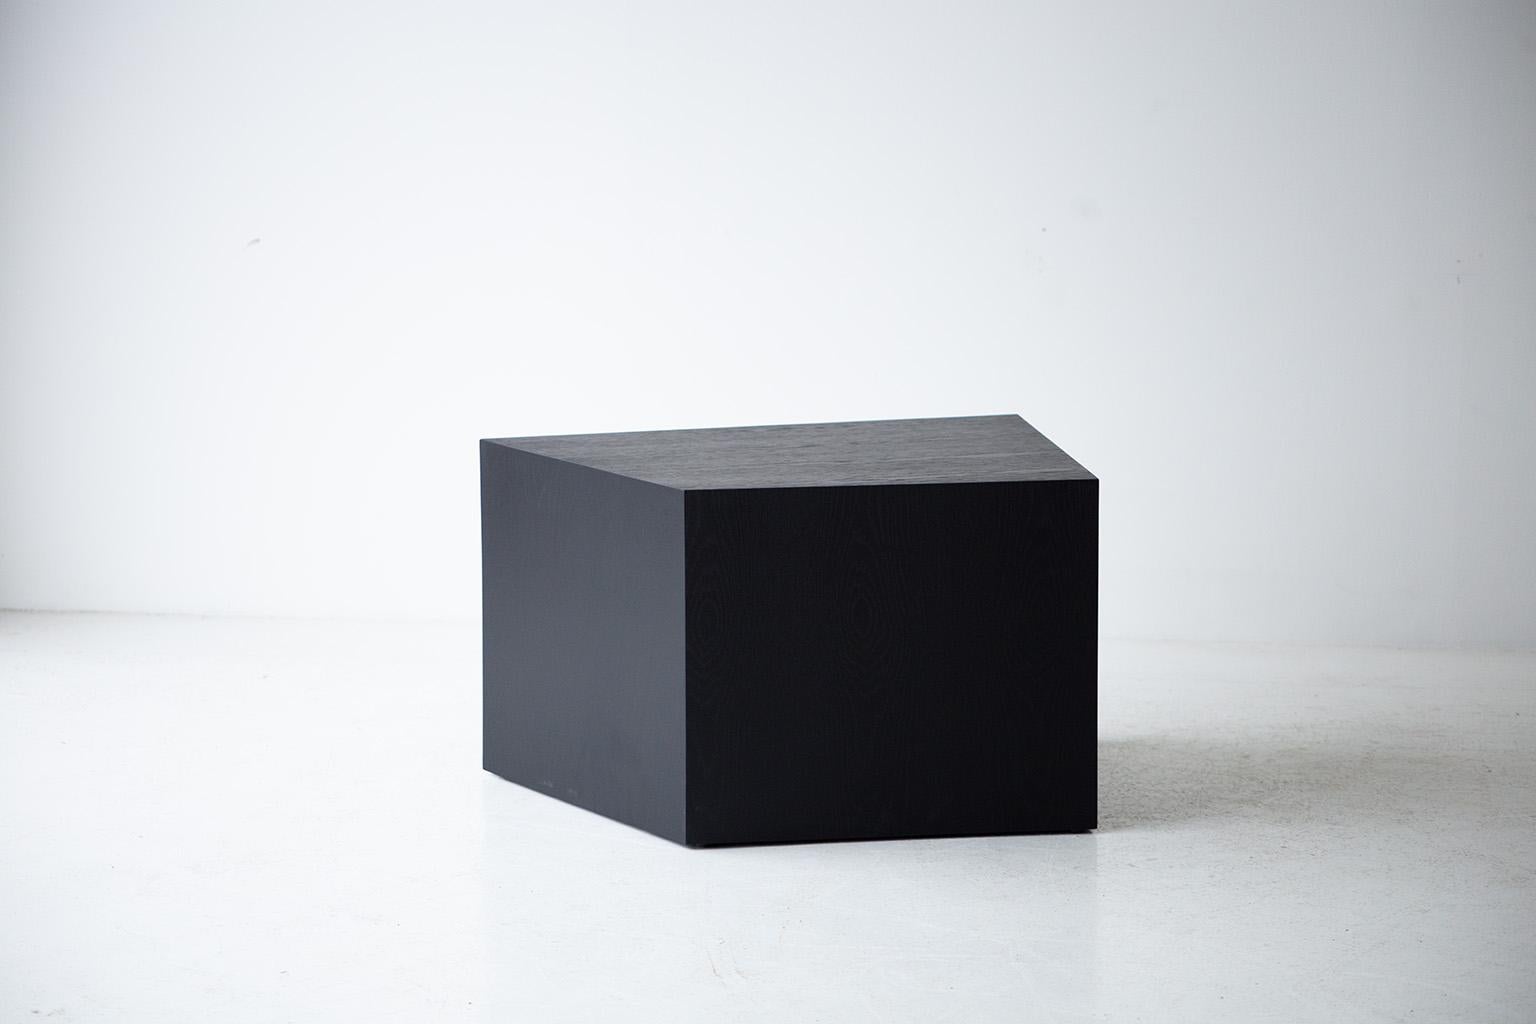 This listing is for the larger version.

This Modern coffee table - the crag tables are made in the heart of Ohio with locally sourced wood. Each table is a hand-made mitered box from white oak veneer and finished with a beautiful matte black